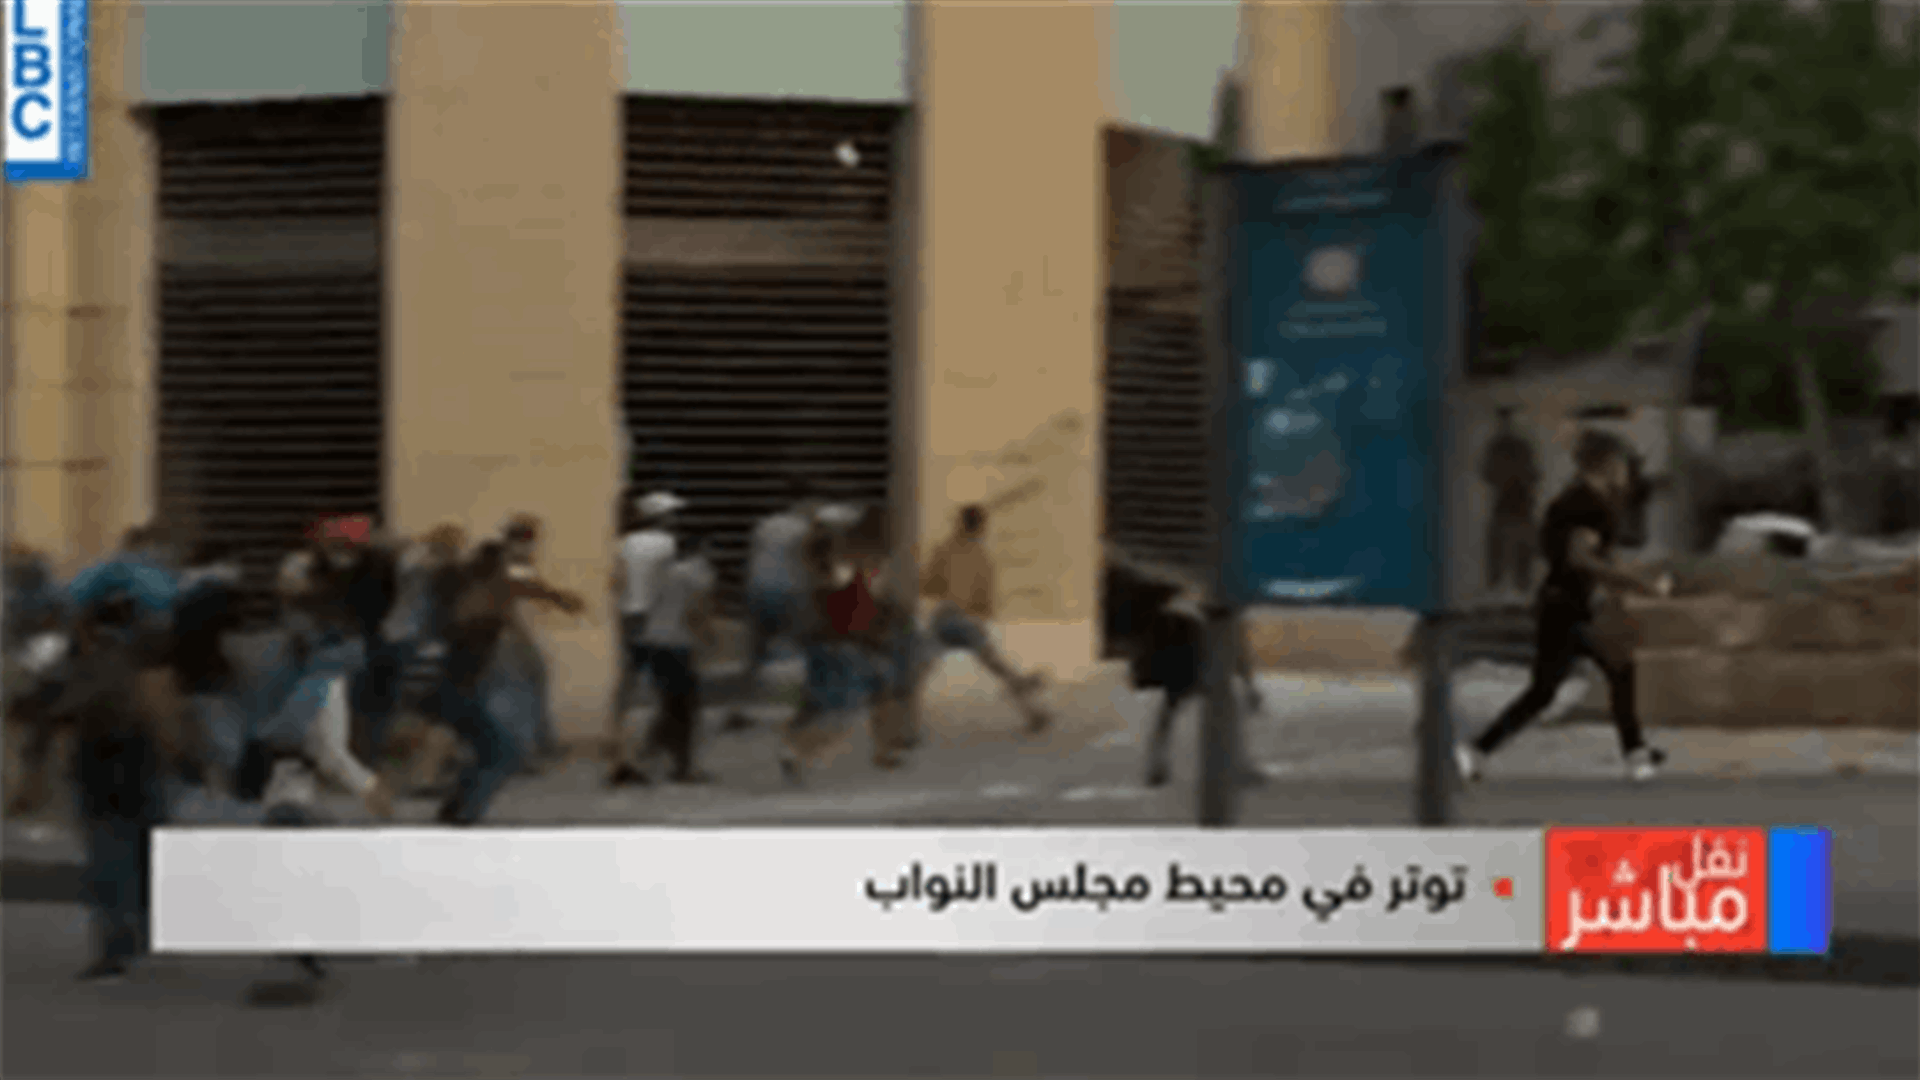 Protesters clash with security forces in downtown Beirut-[VIDEO]